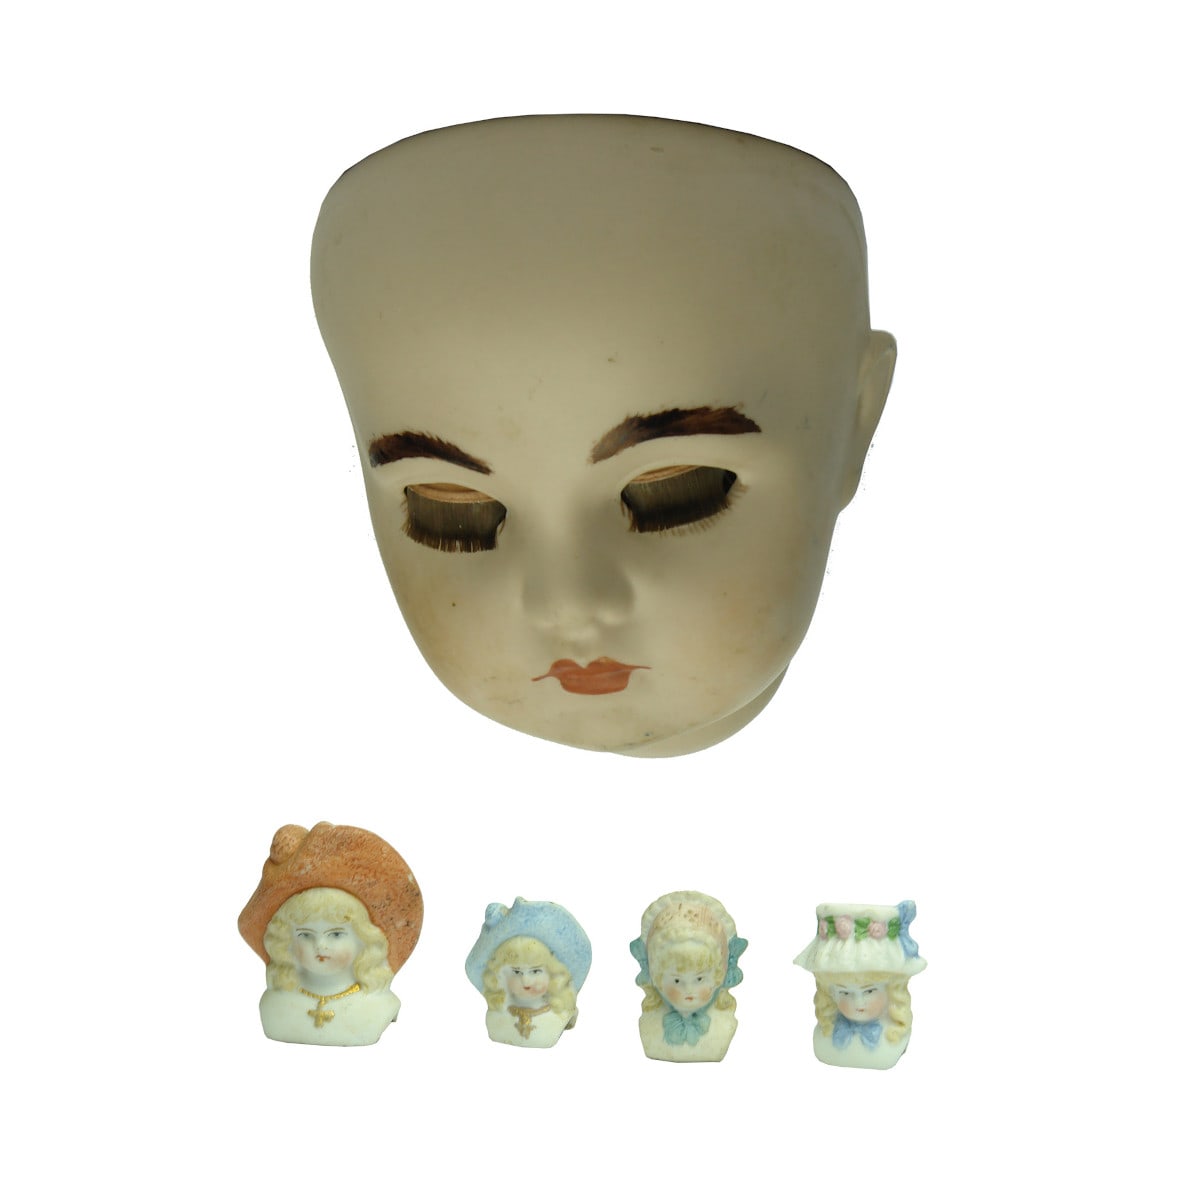 5 Dolls Heads. 4 x Unusual Bonnet Doll's Heads and 1 Large Bisque Doll's Head.